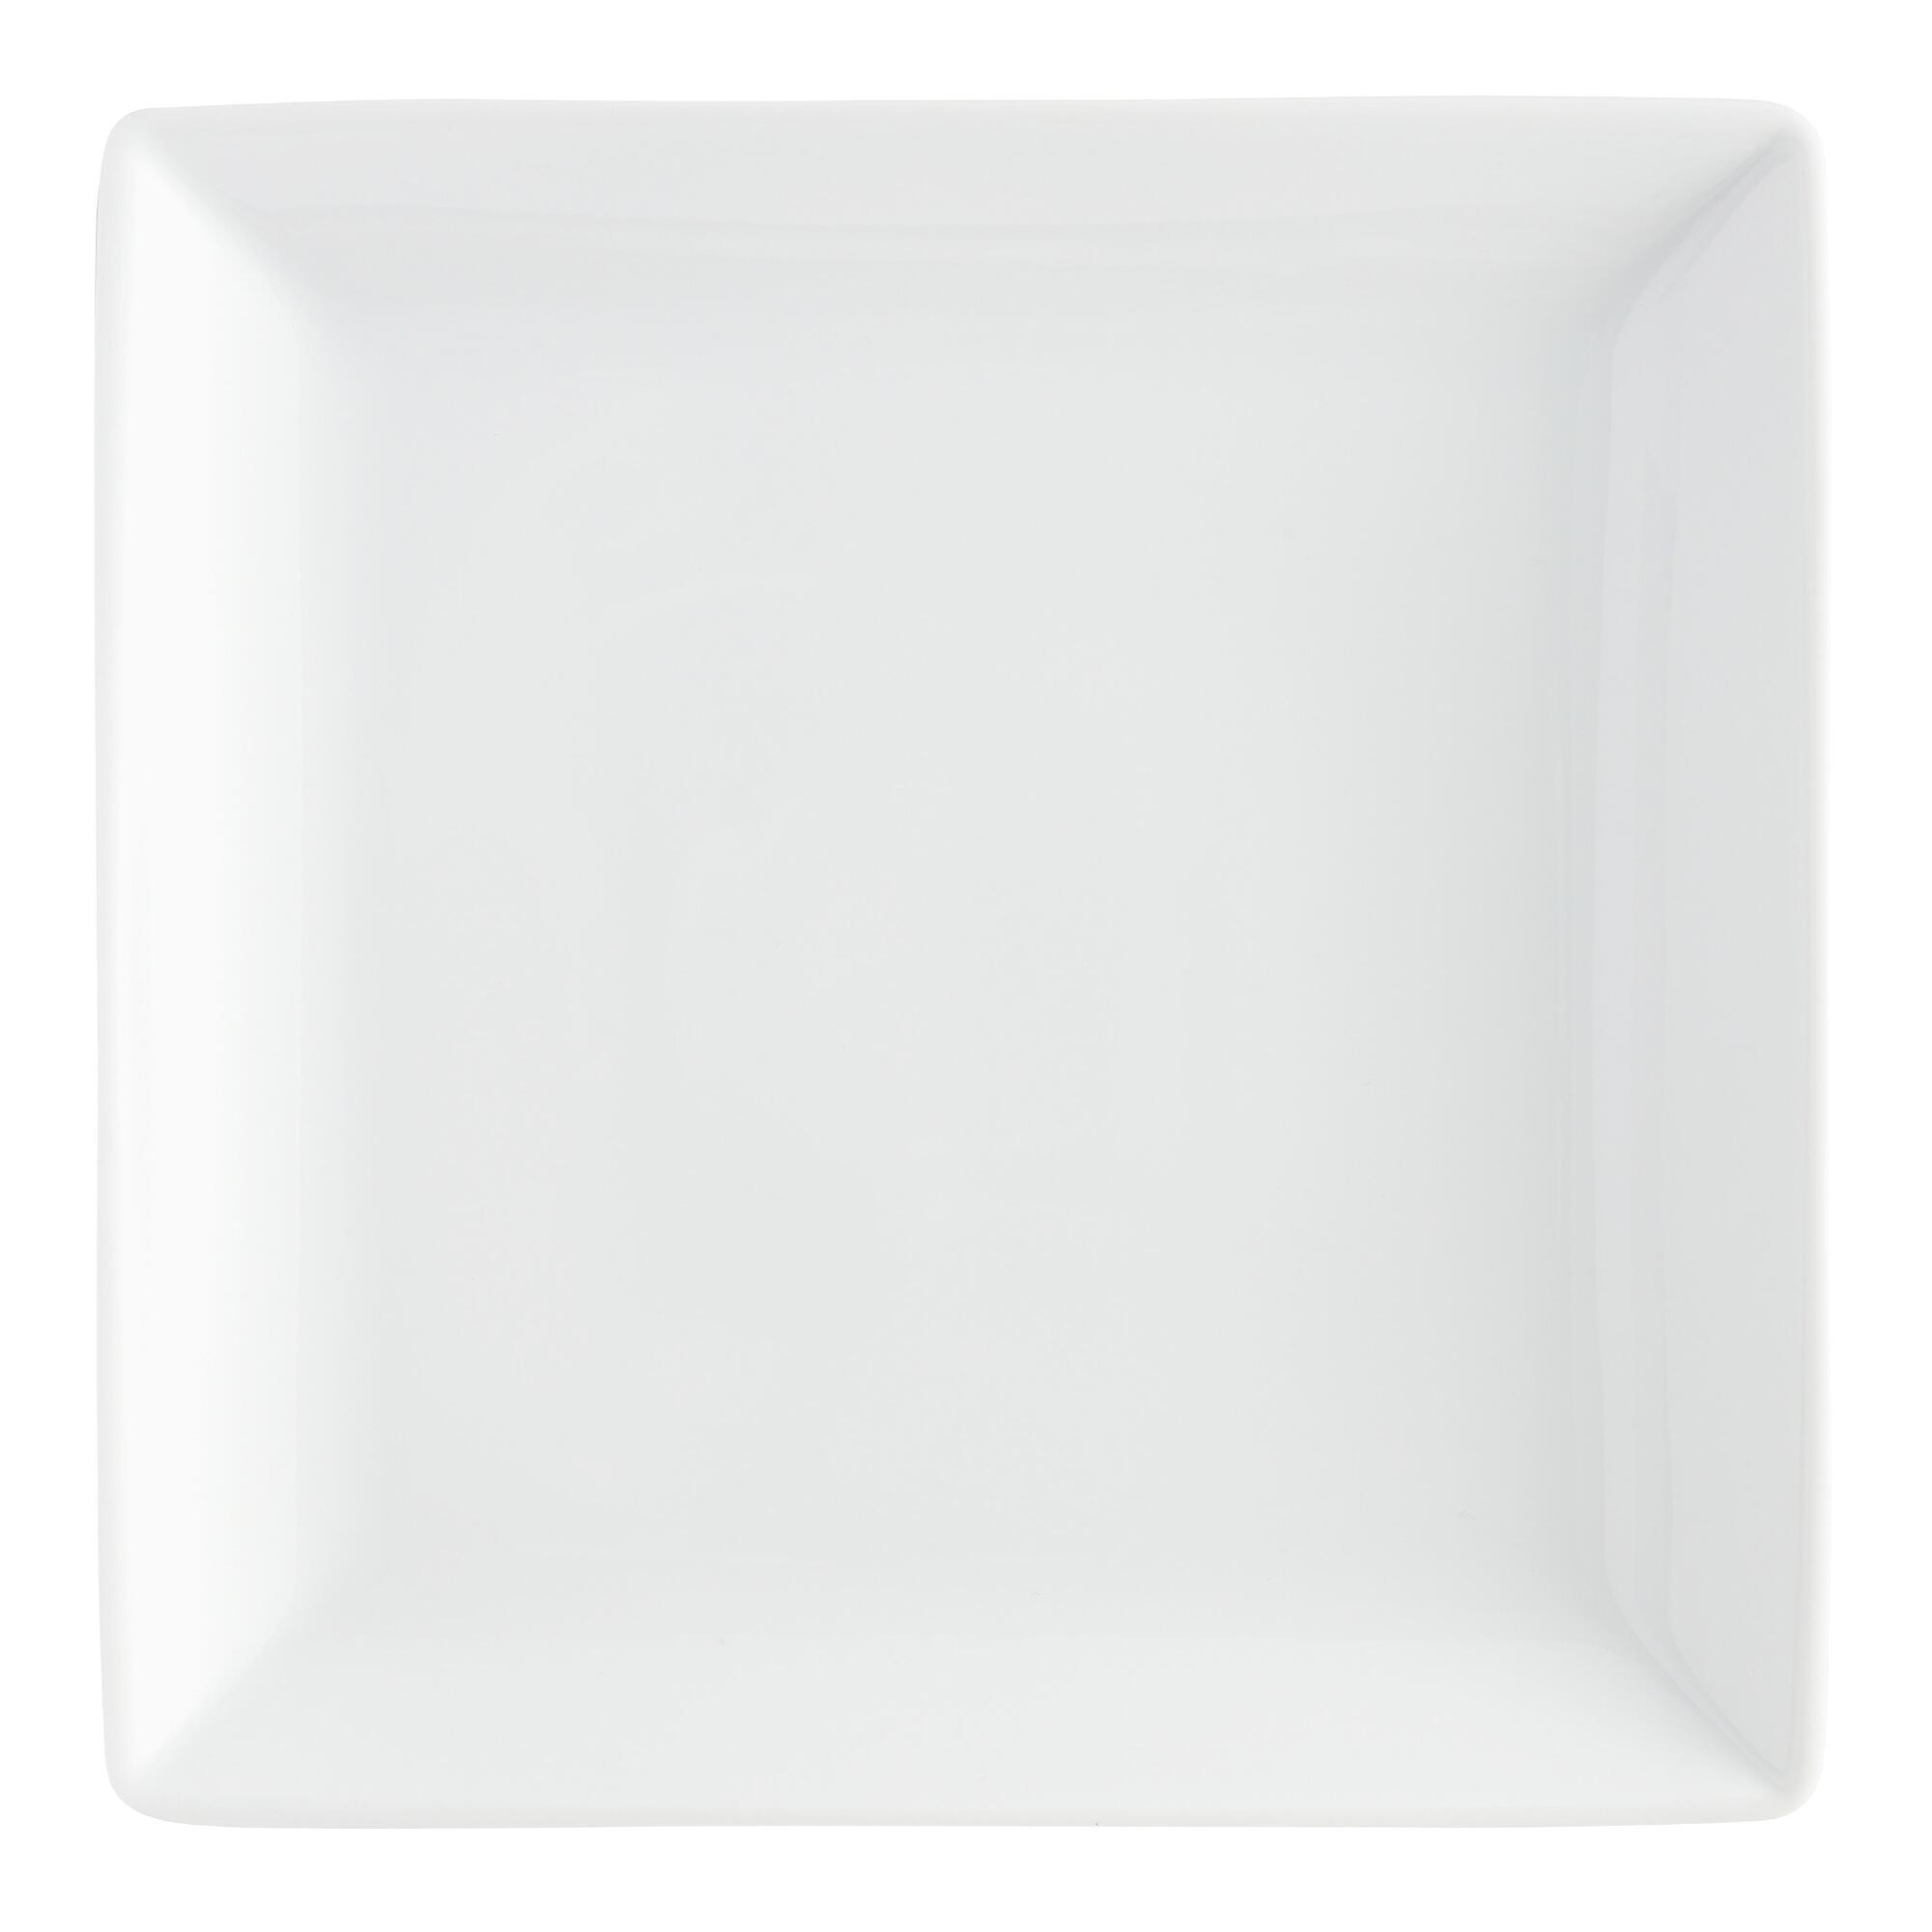 Square White Porcelain Coupe Dinner Plates Set Of 4 by World Market